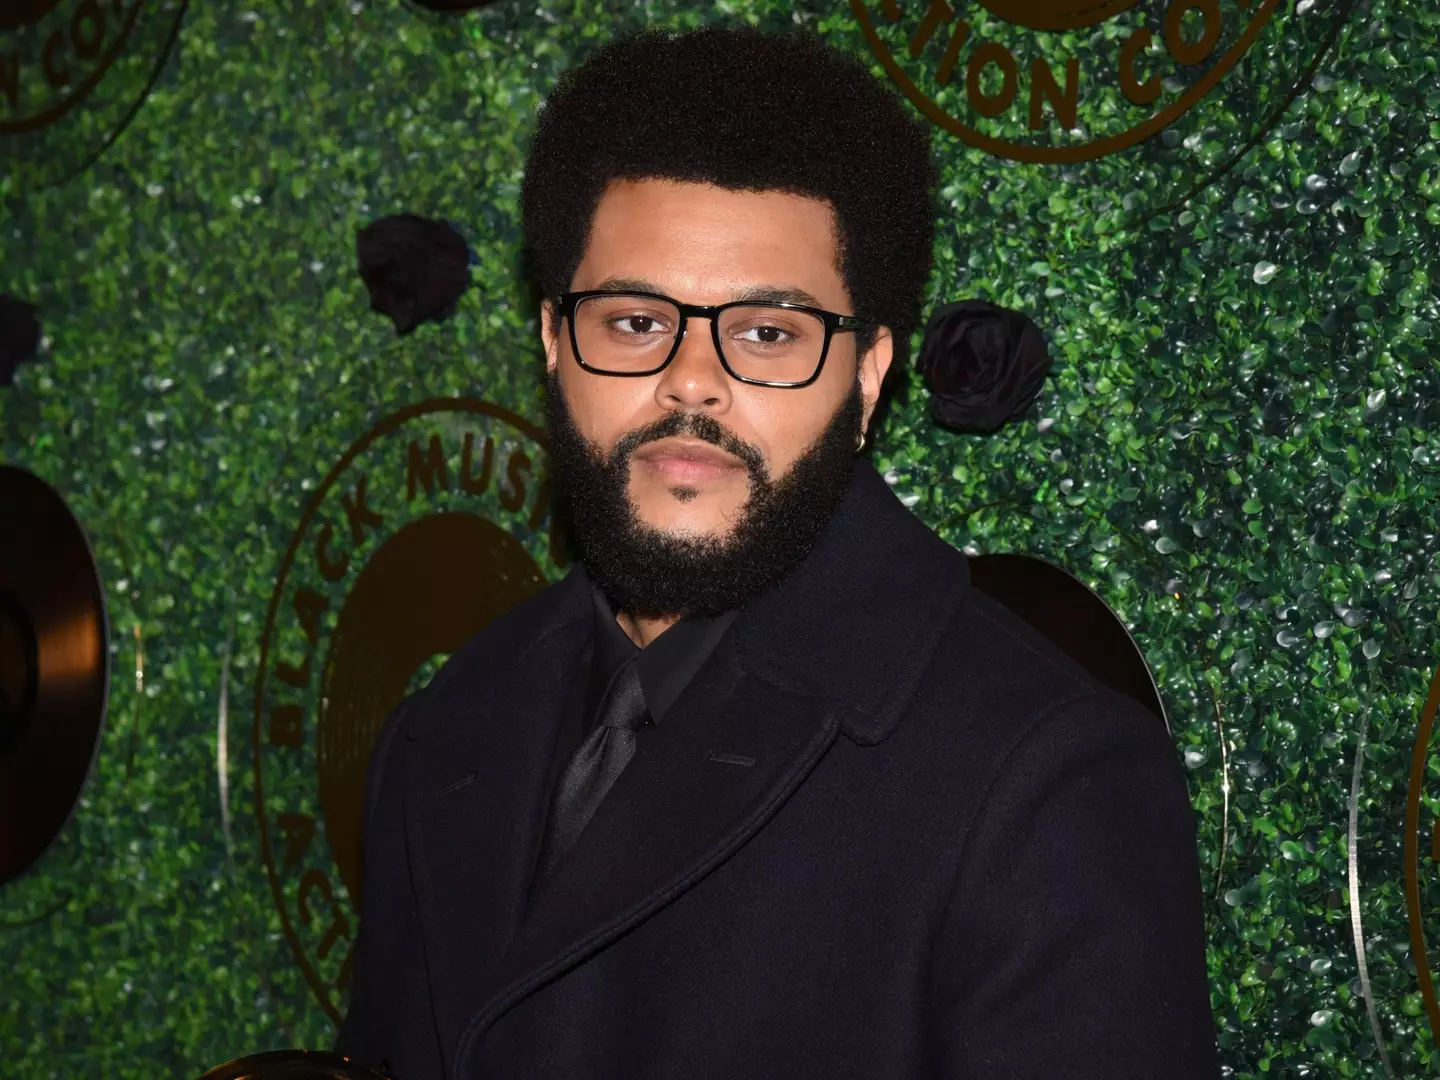 The Weeknd cancelled his show in Toronto.